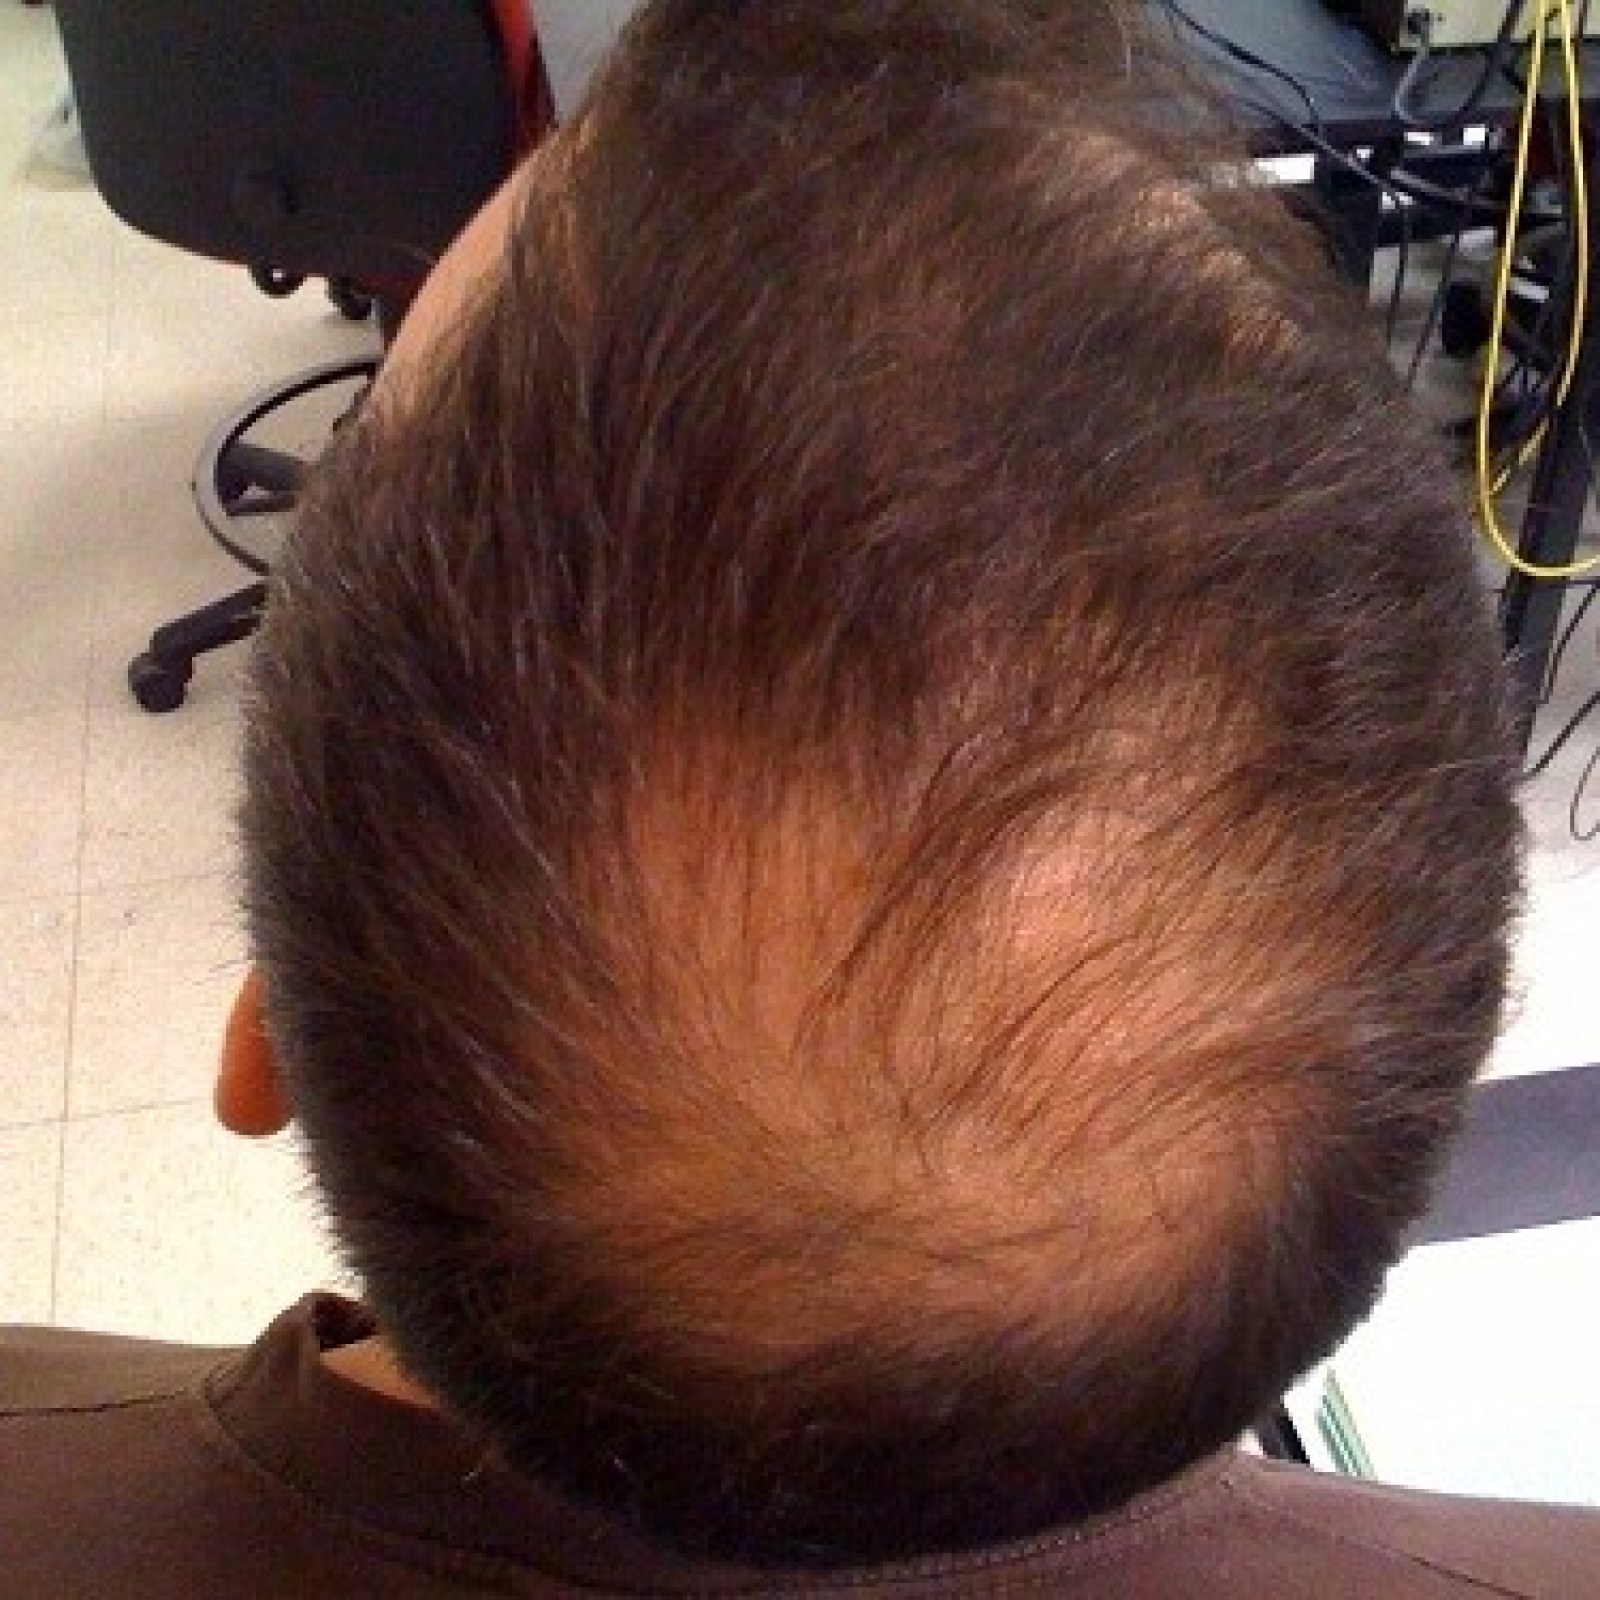 Have scientists discovered the cure for baldness?